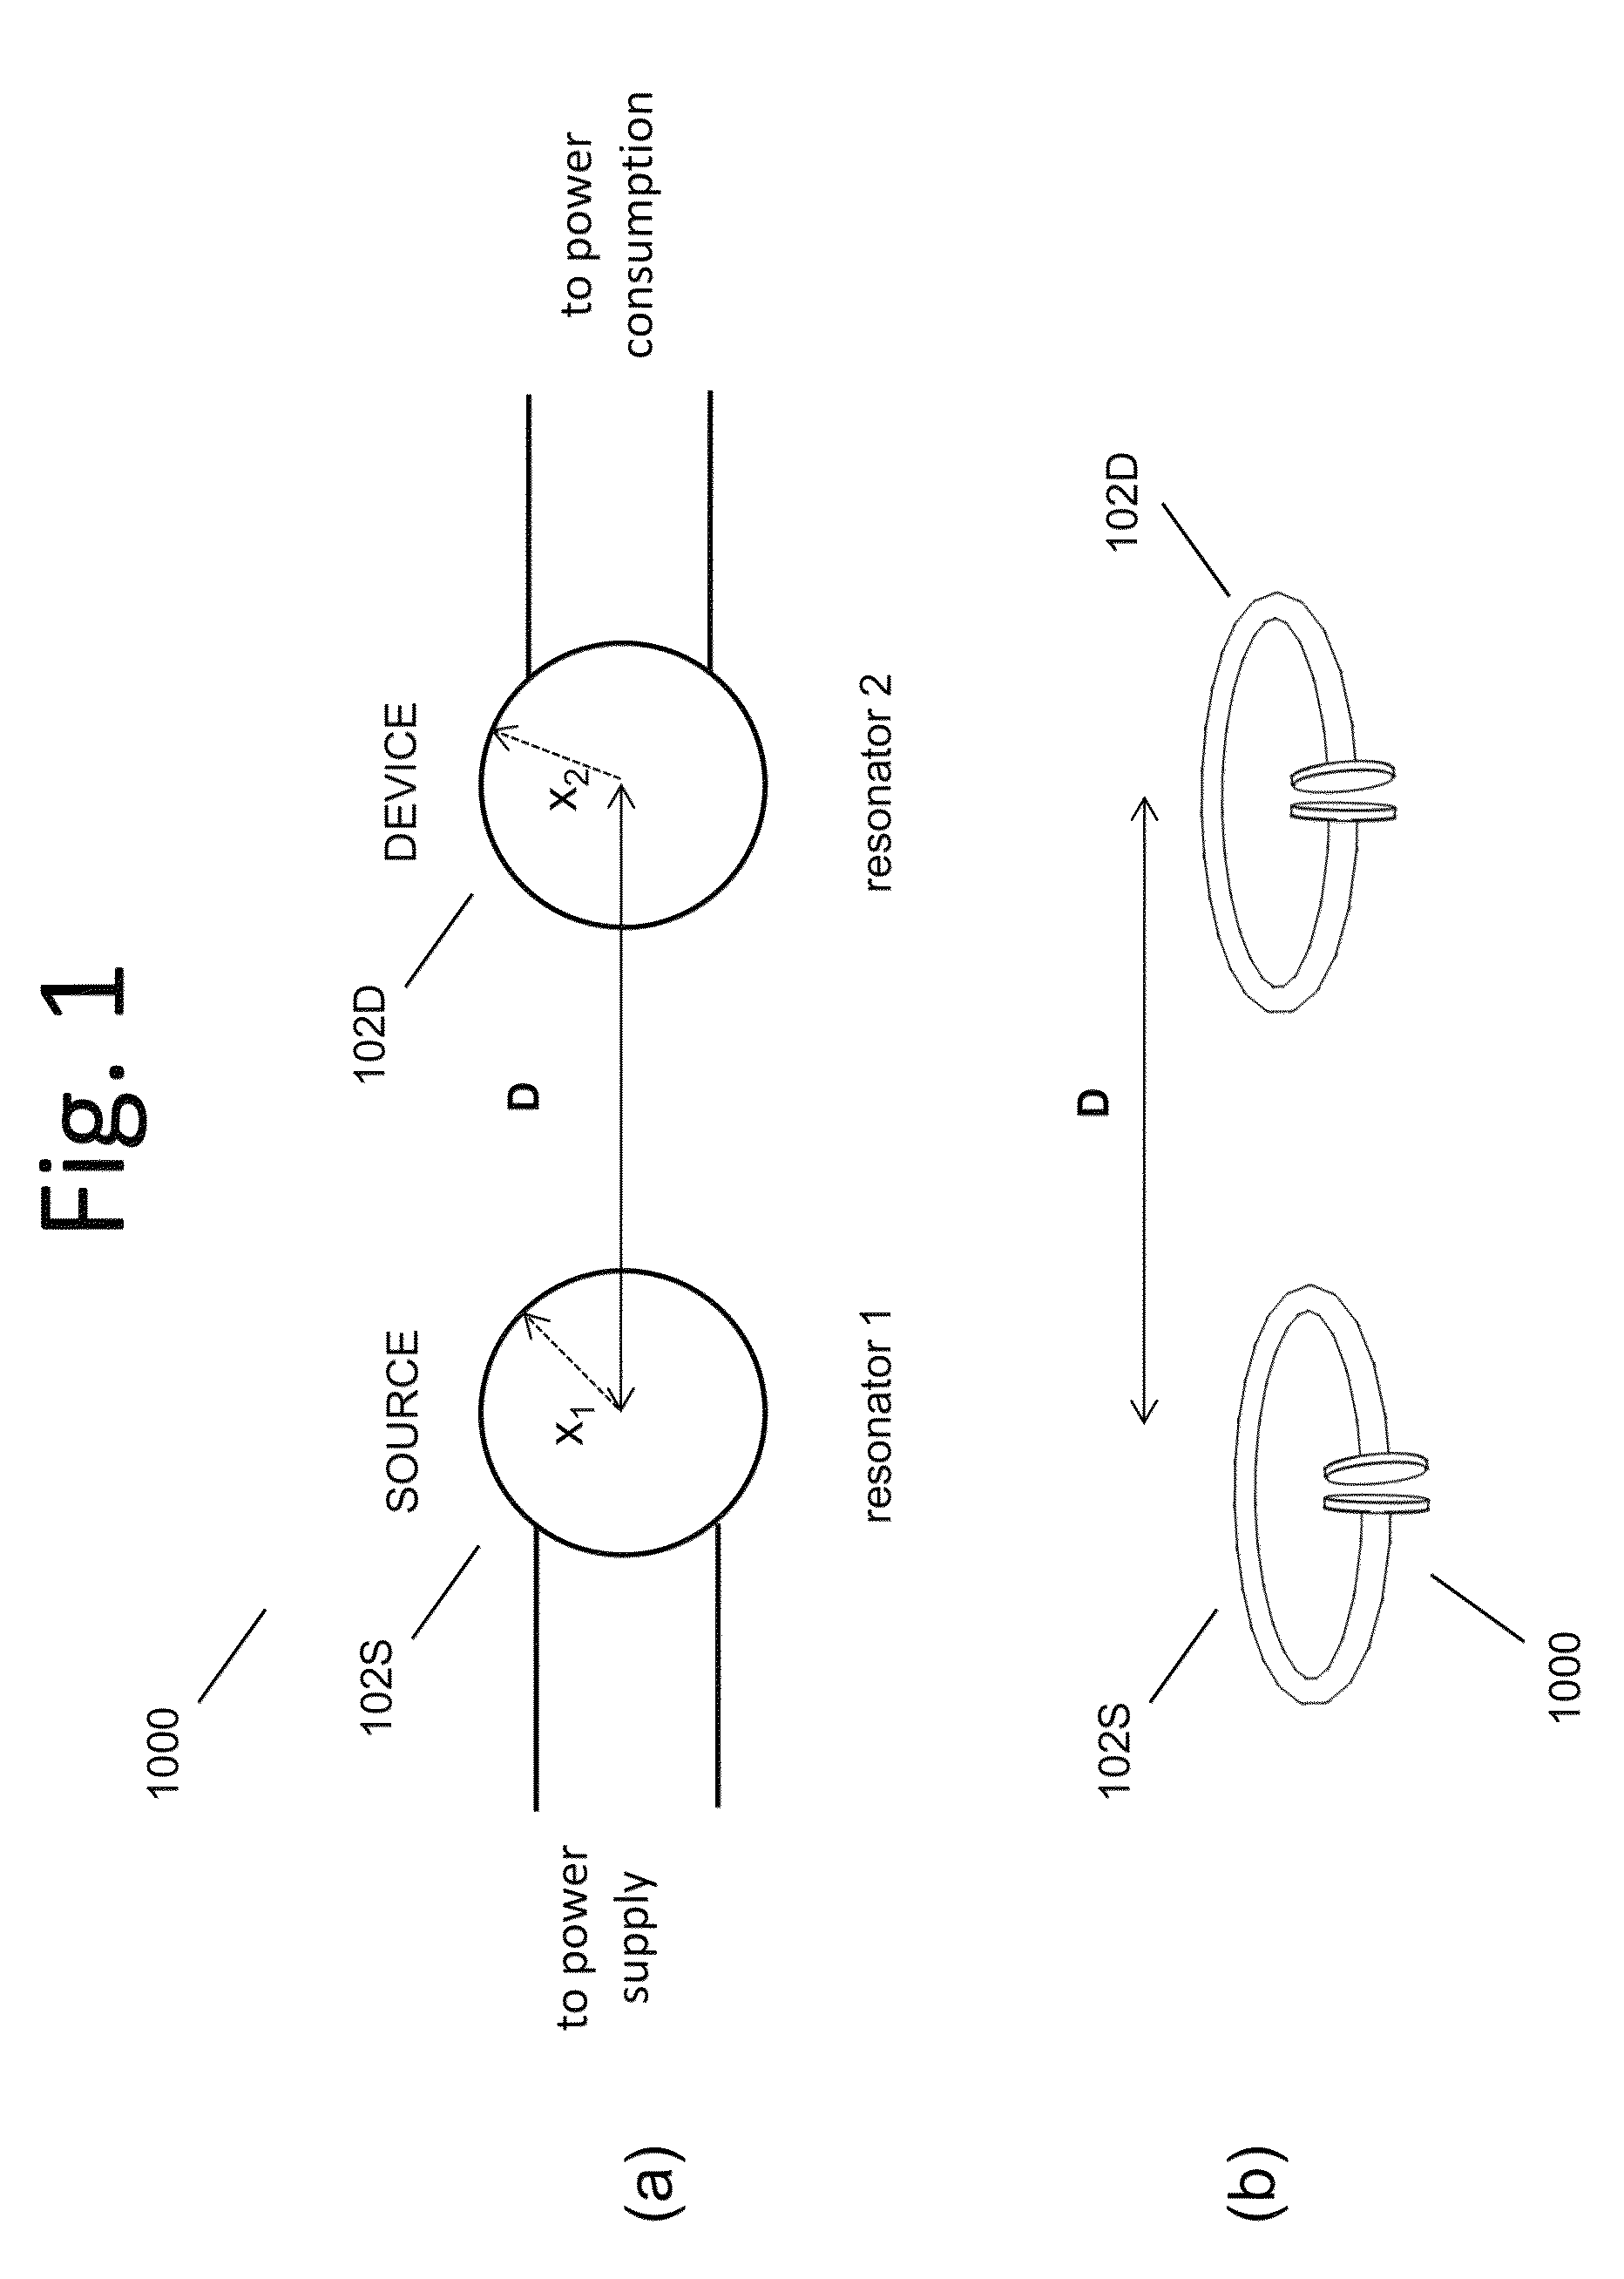 Wireless energy transfer with variable size resonators for implanted medical devices